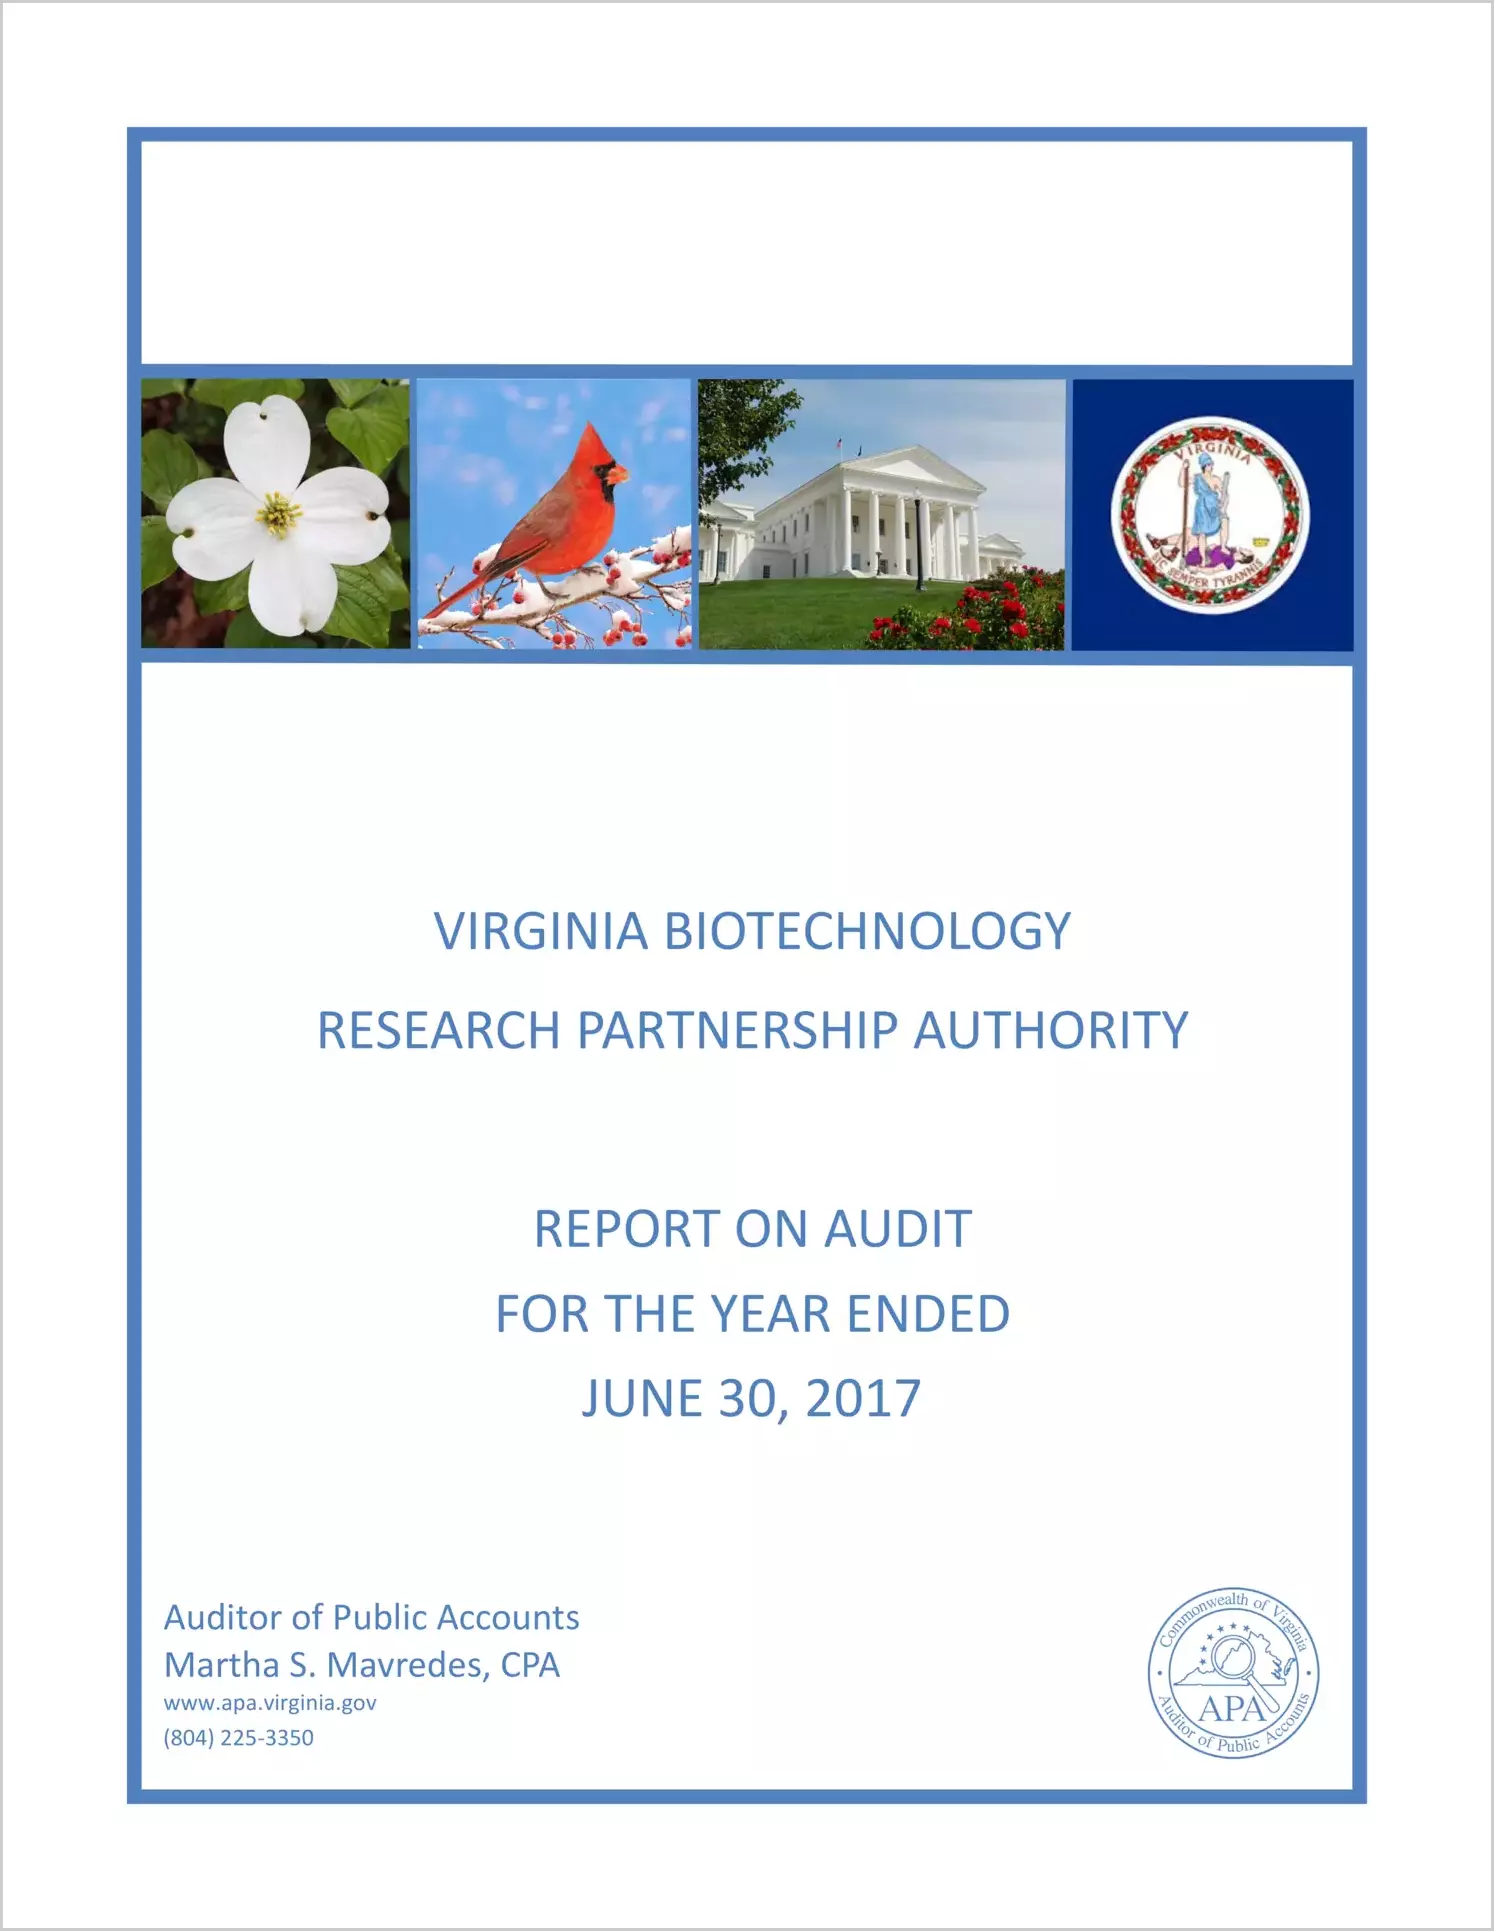 Virginia Biotechnology Research Partnership Authority for the year ended June 30, 2017